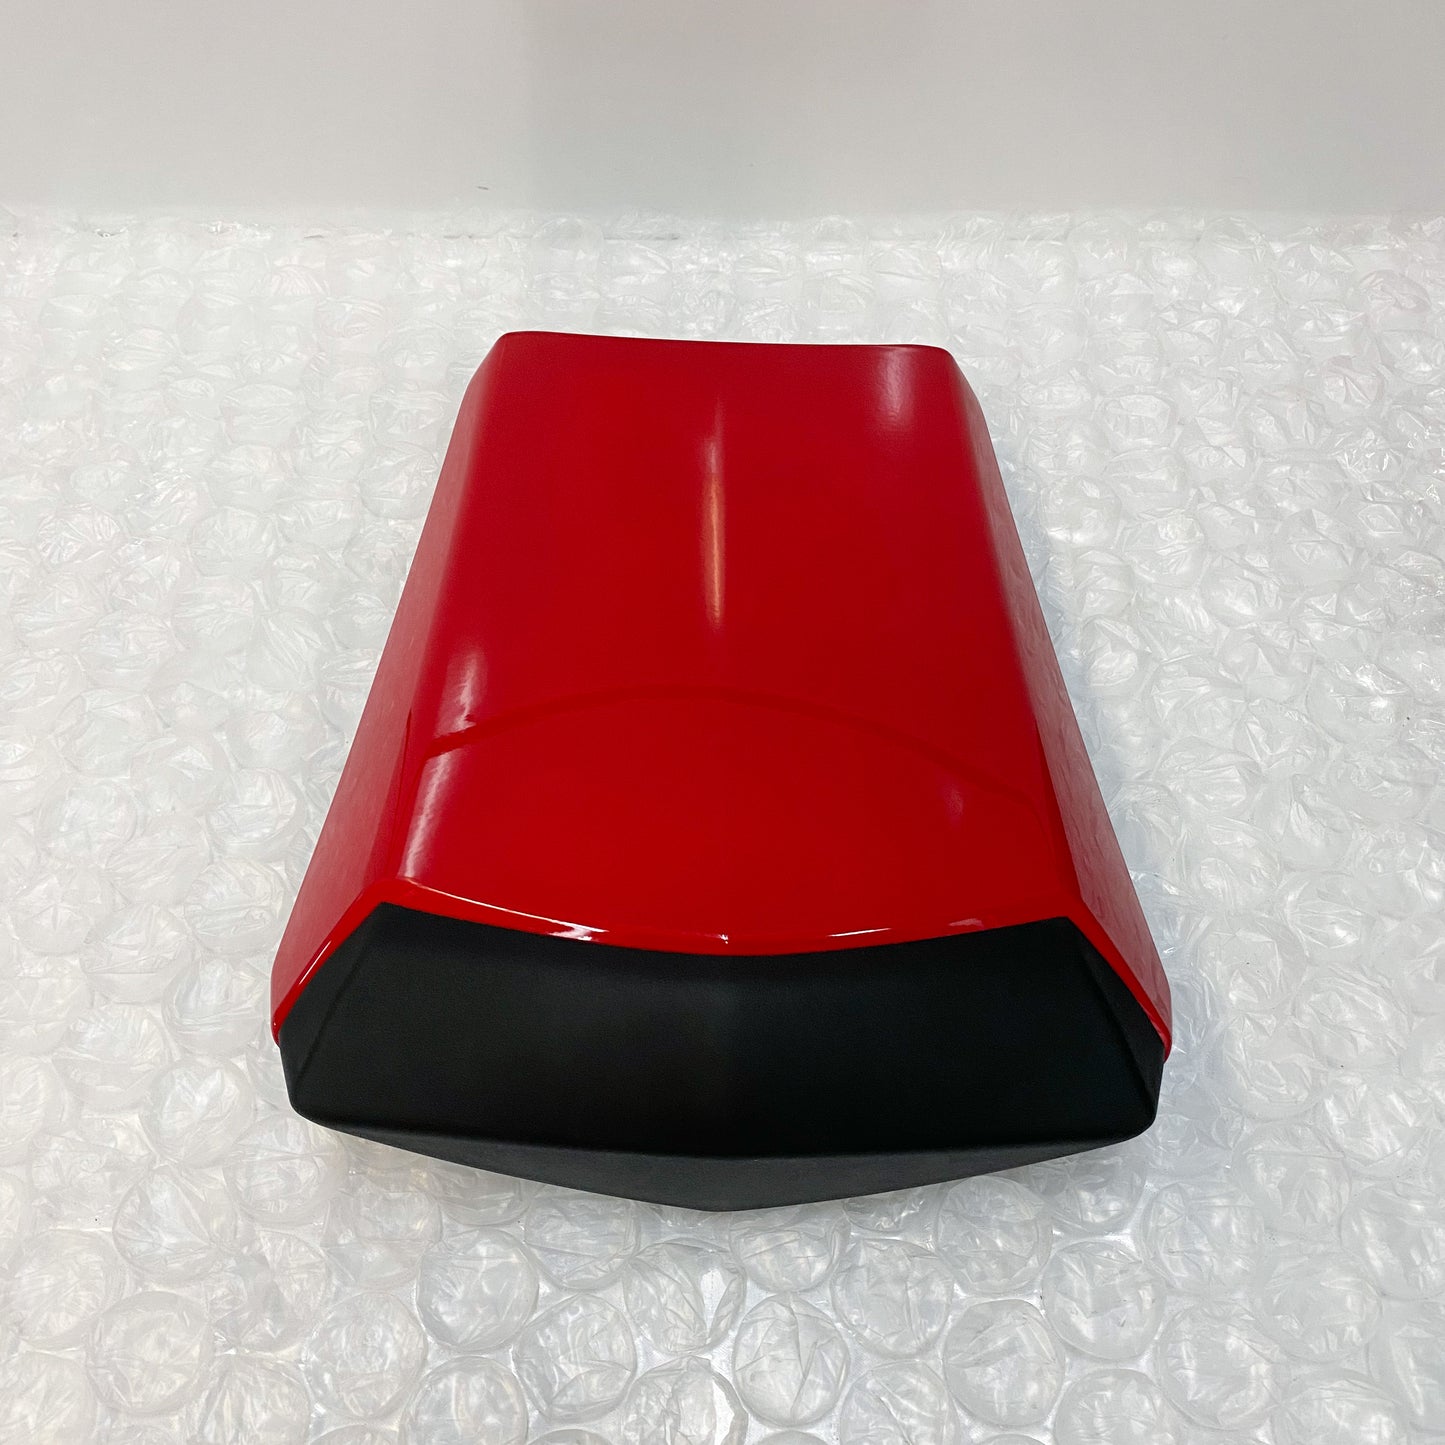 Yamaha '02 R1 Seat Cover, Red 5PW-W0771-10